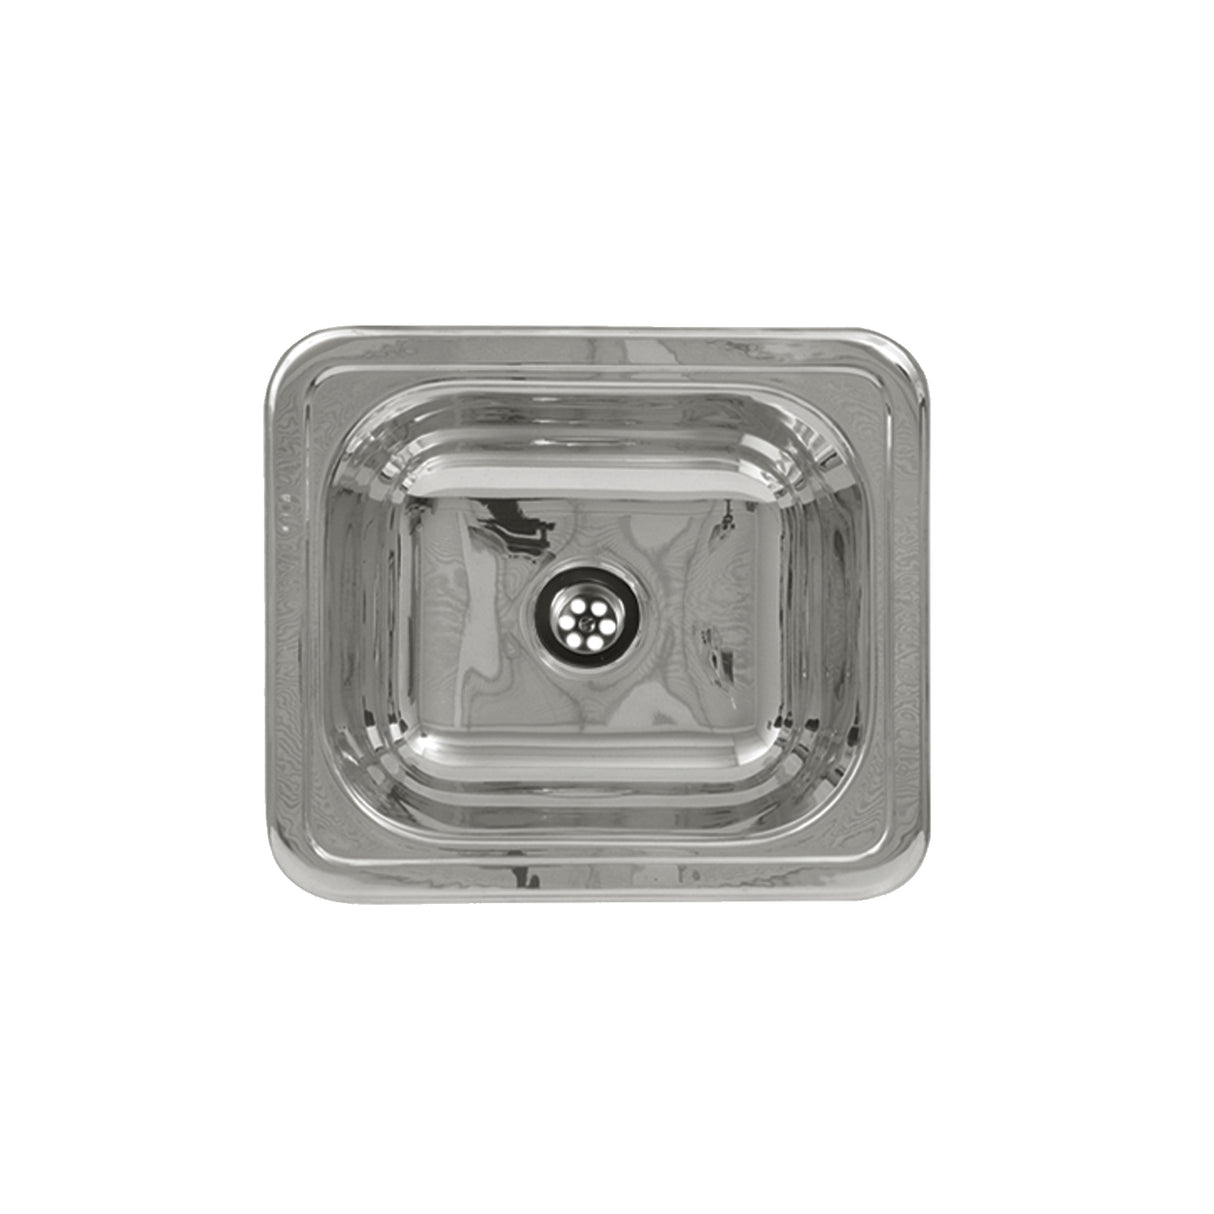 Rectangular Drop-in Entertainment/Prep Sink with a Smooth Surface